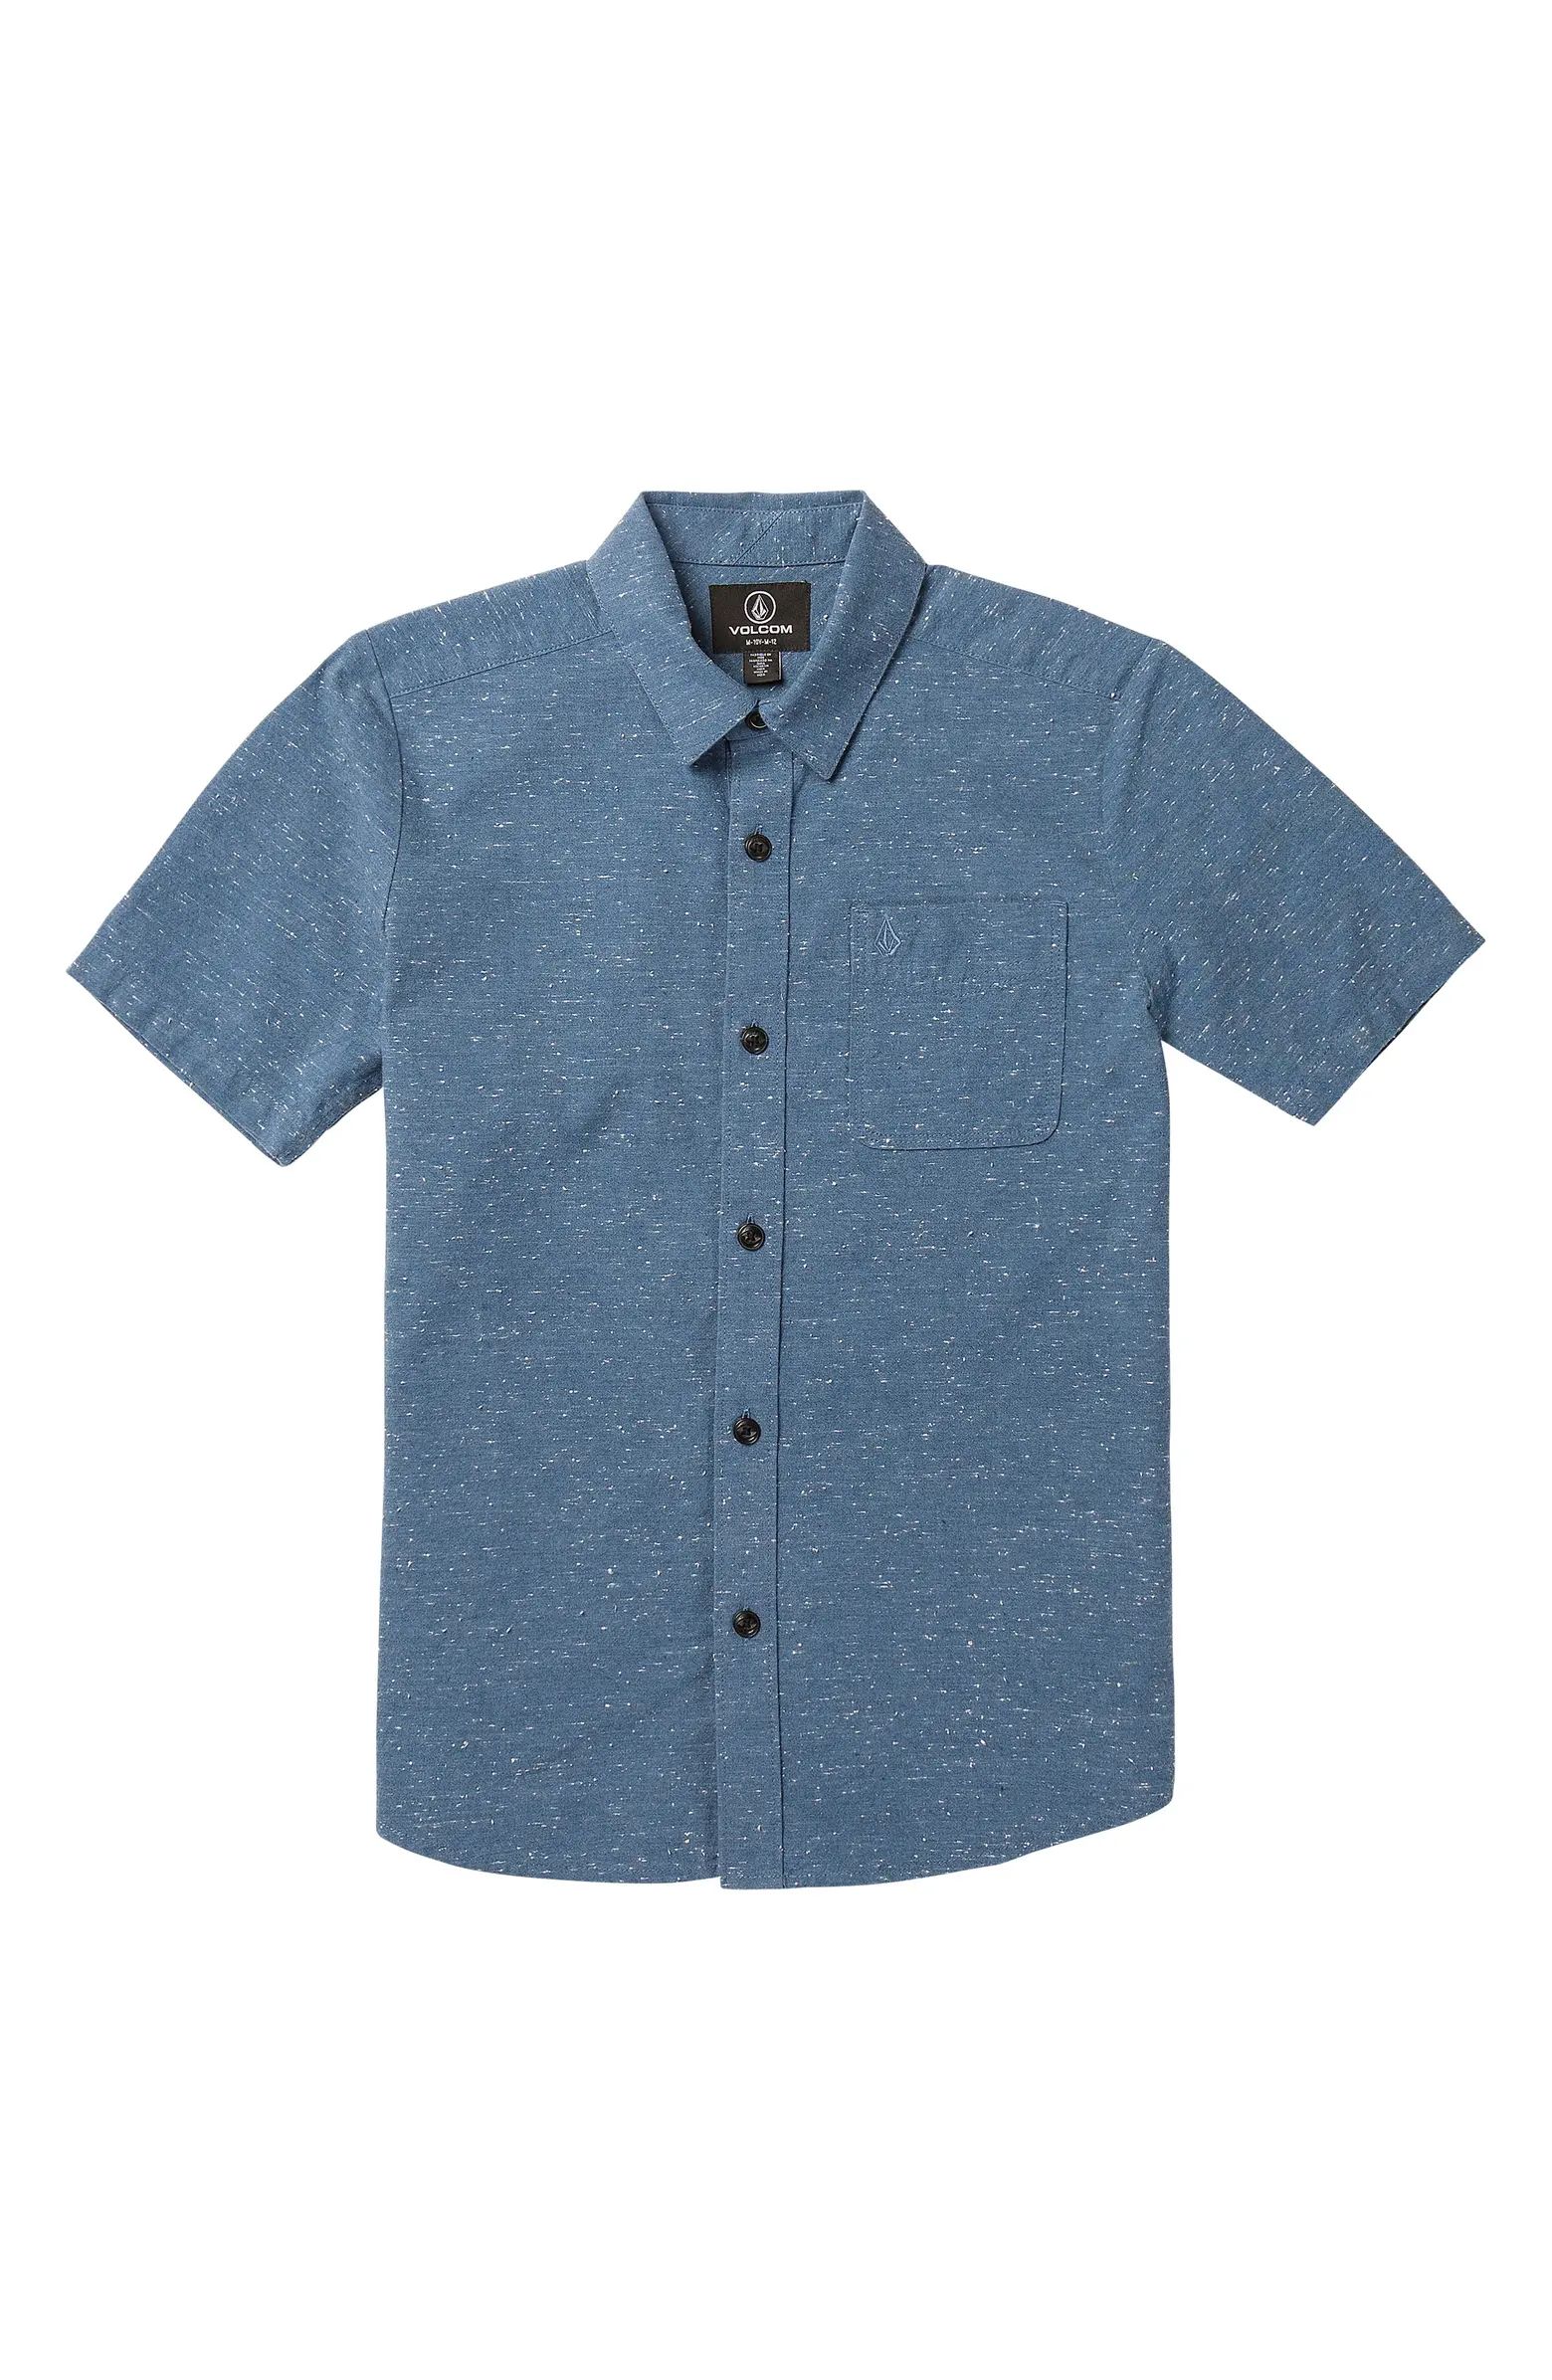 Kids' Play Date Knight Chambray Short Sleeve Button-Up Shirt | Nordstrom